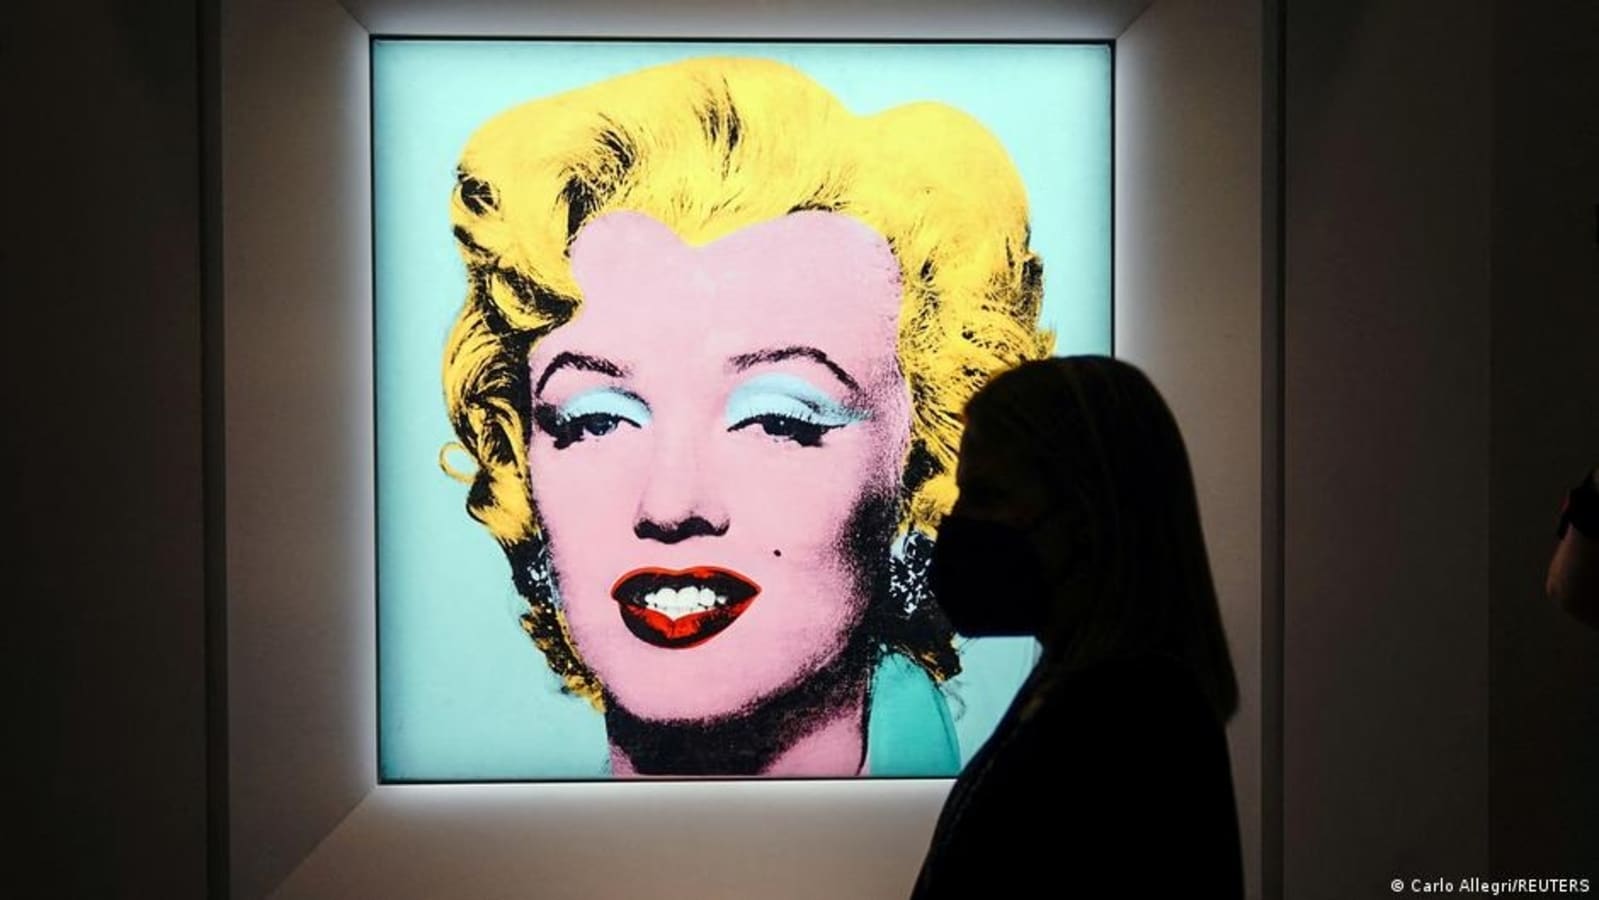 Andy Warhol’s Marilyn Monroe portrait sold for record USD 195 million